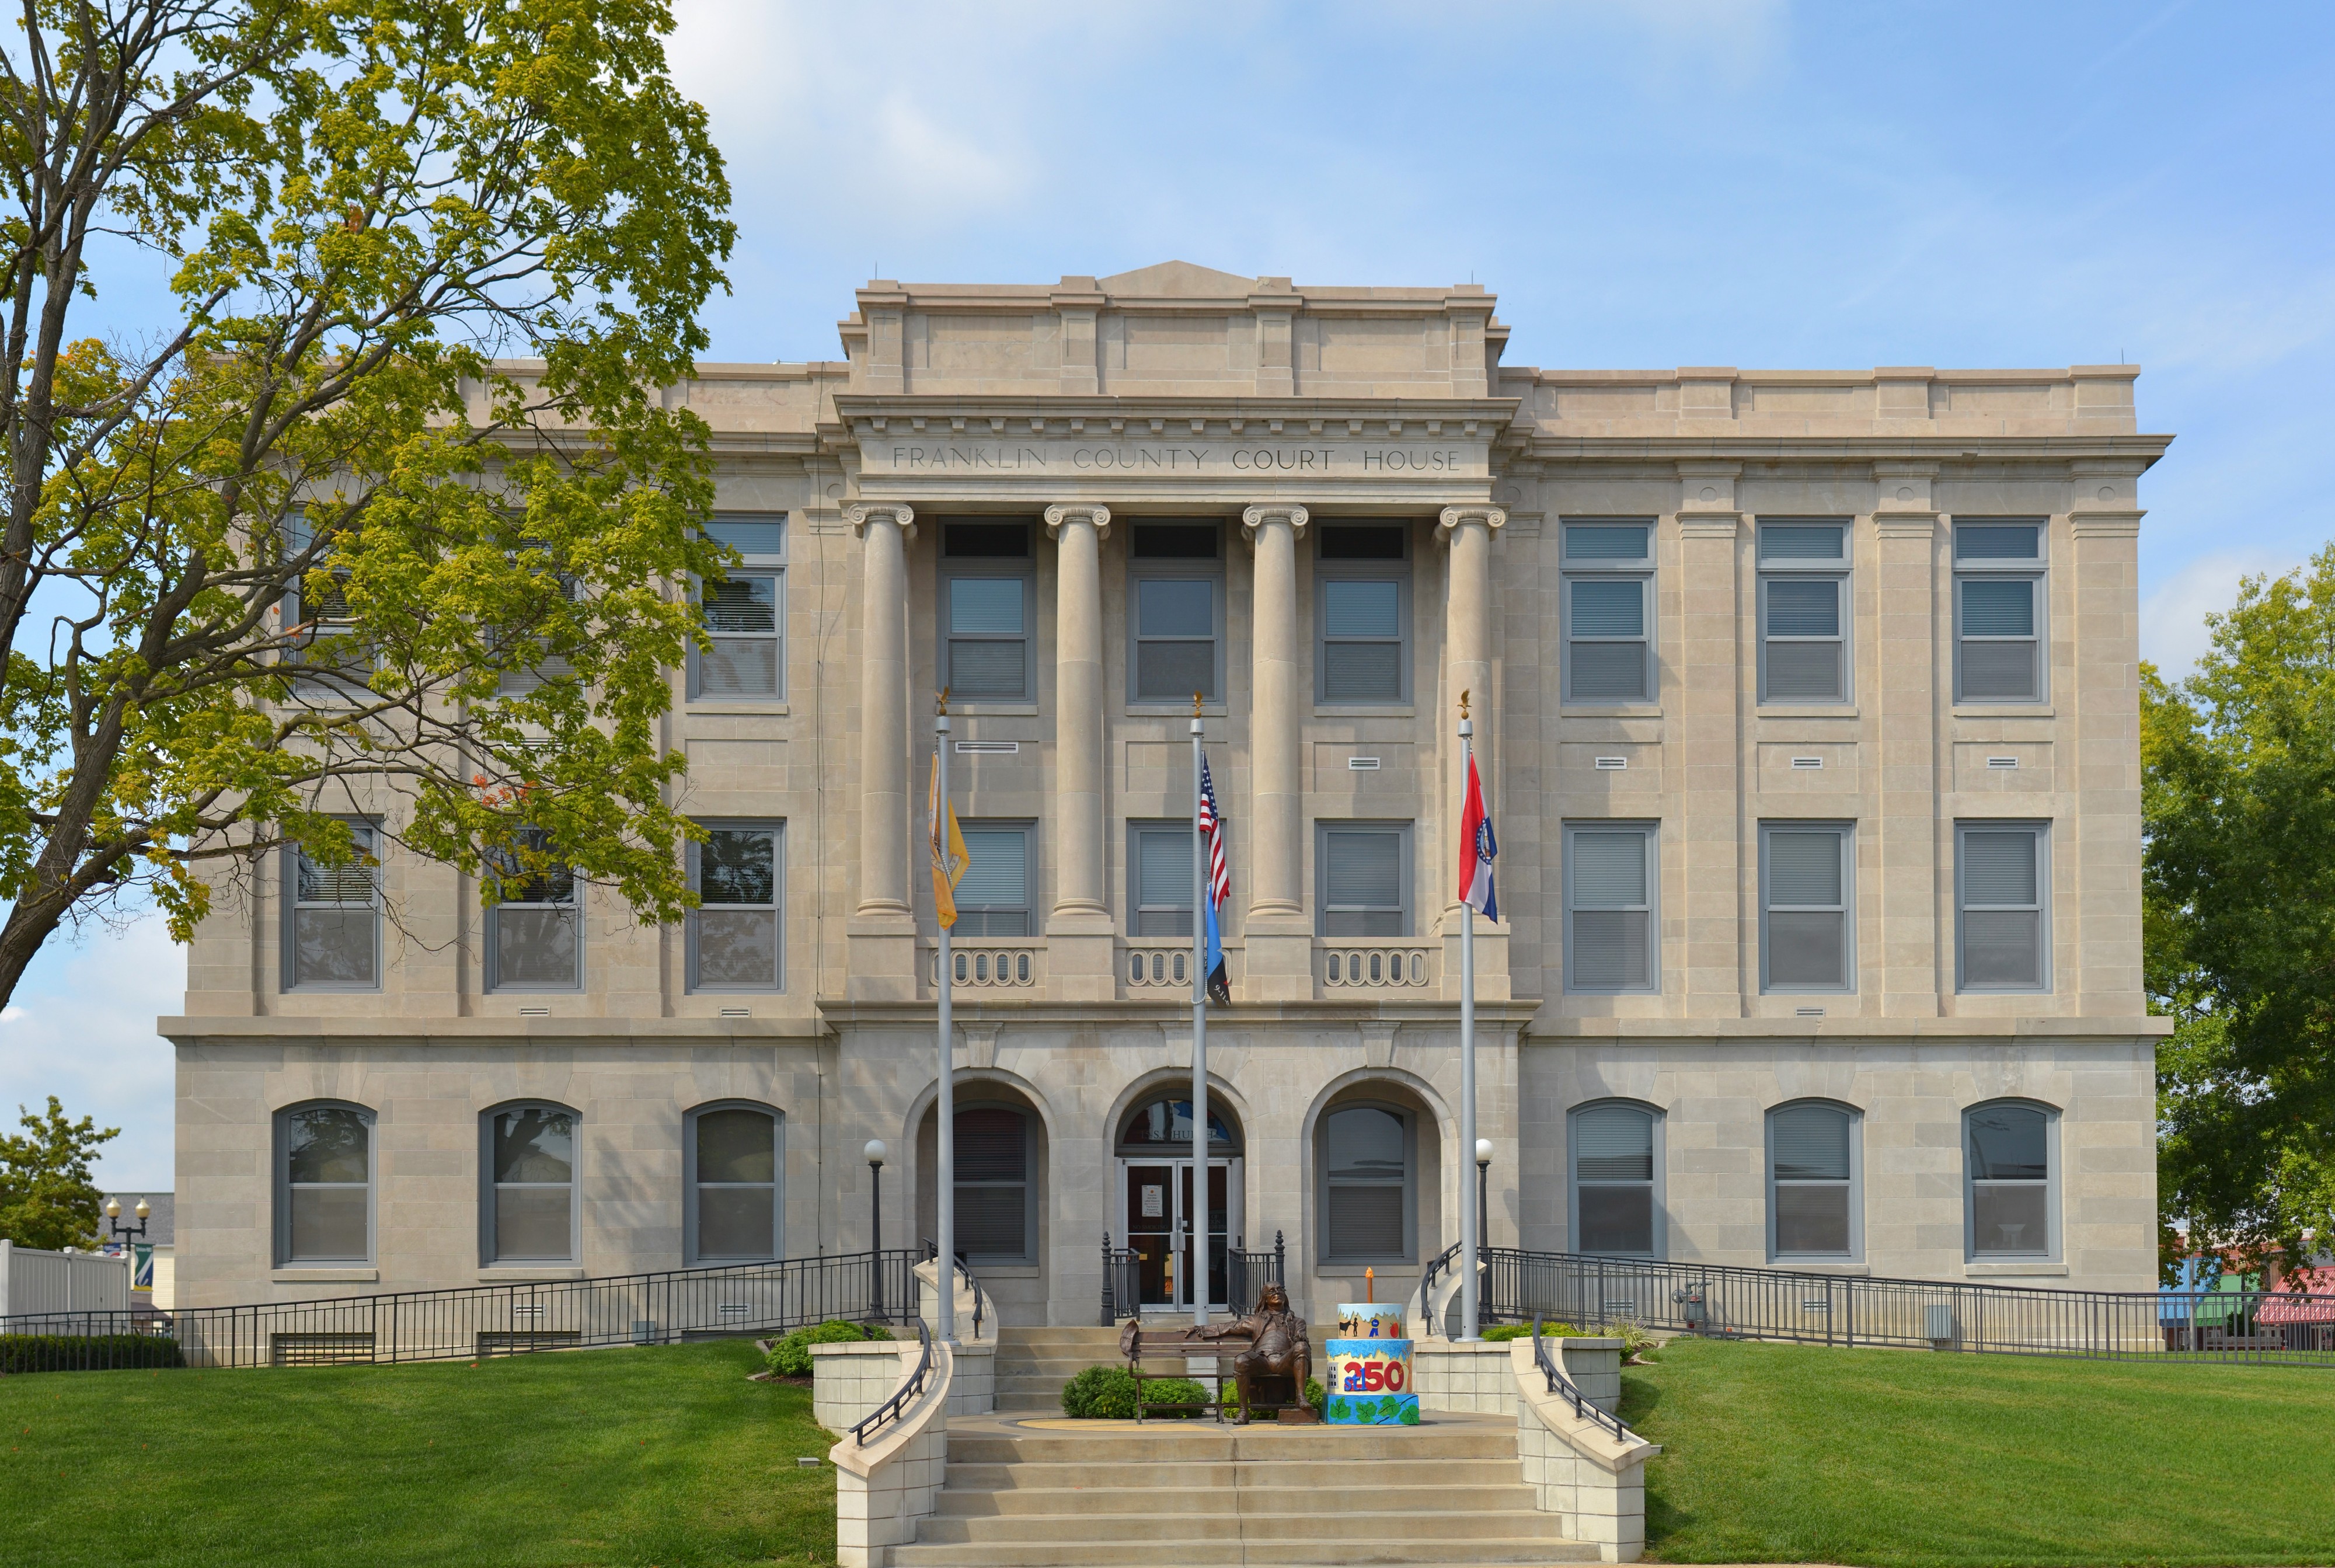 Franklin County MO Courthouse 20140920 pano1